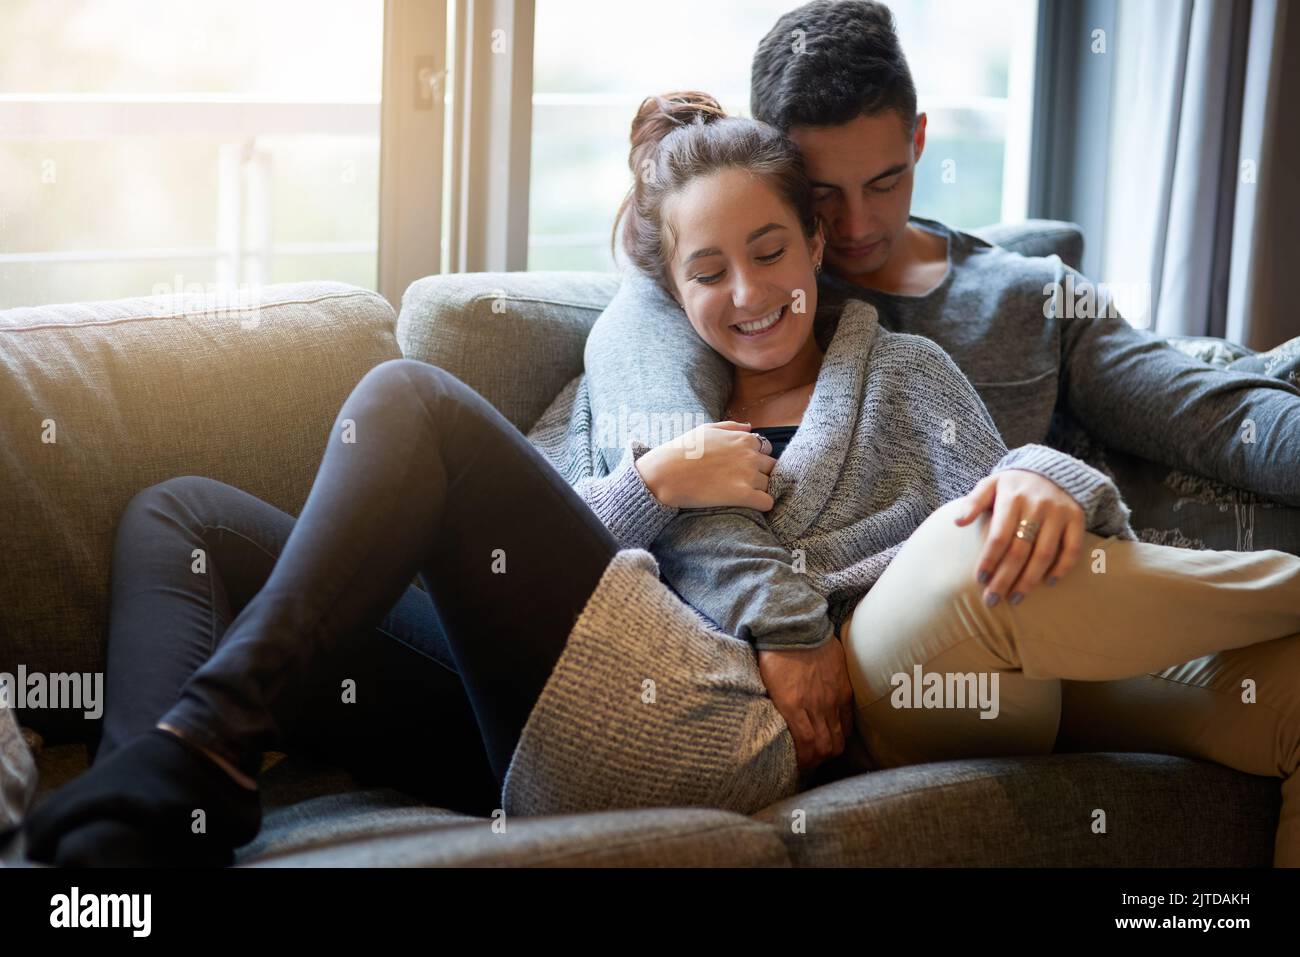 Getting closer with each passing moment. an affectionate young couple relaxing on the sofa at home. Stock Photo